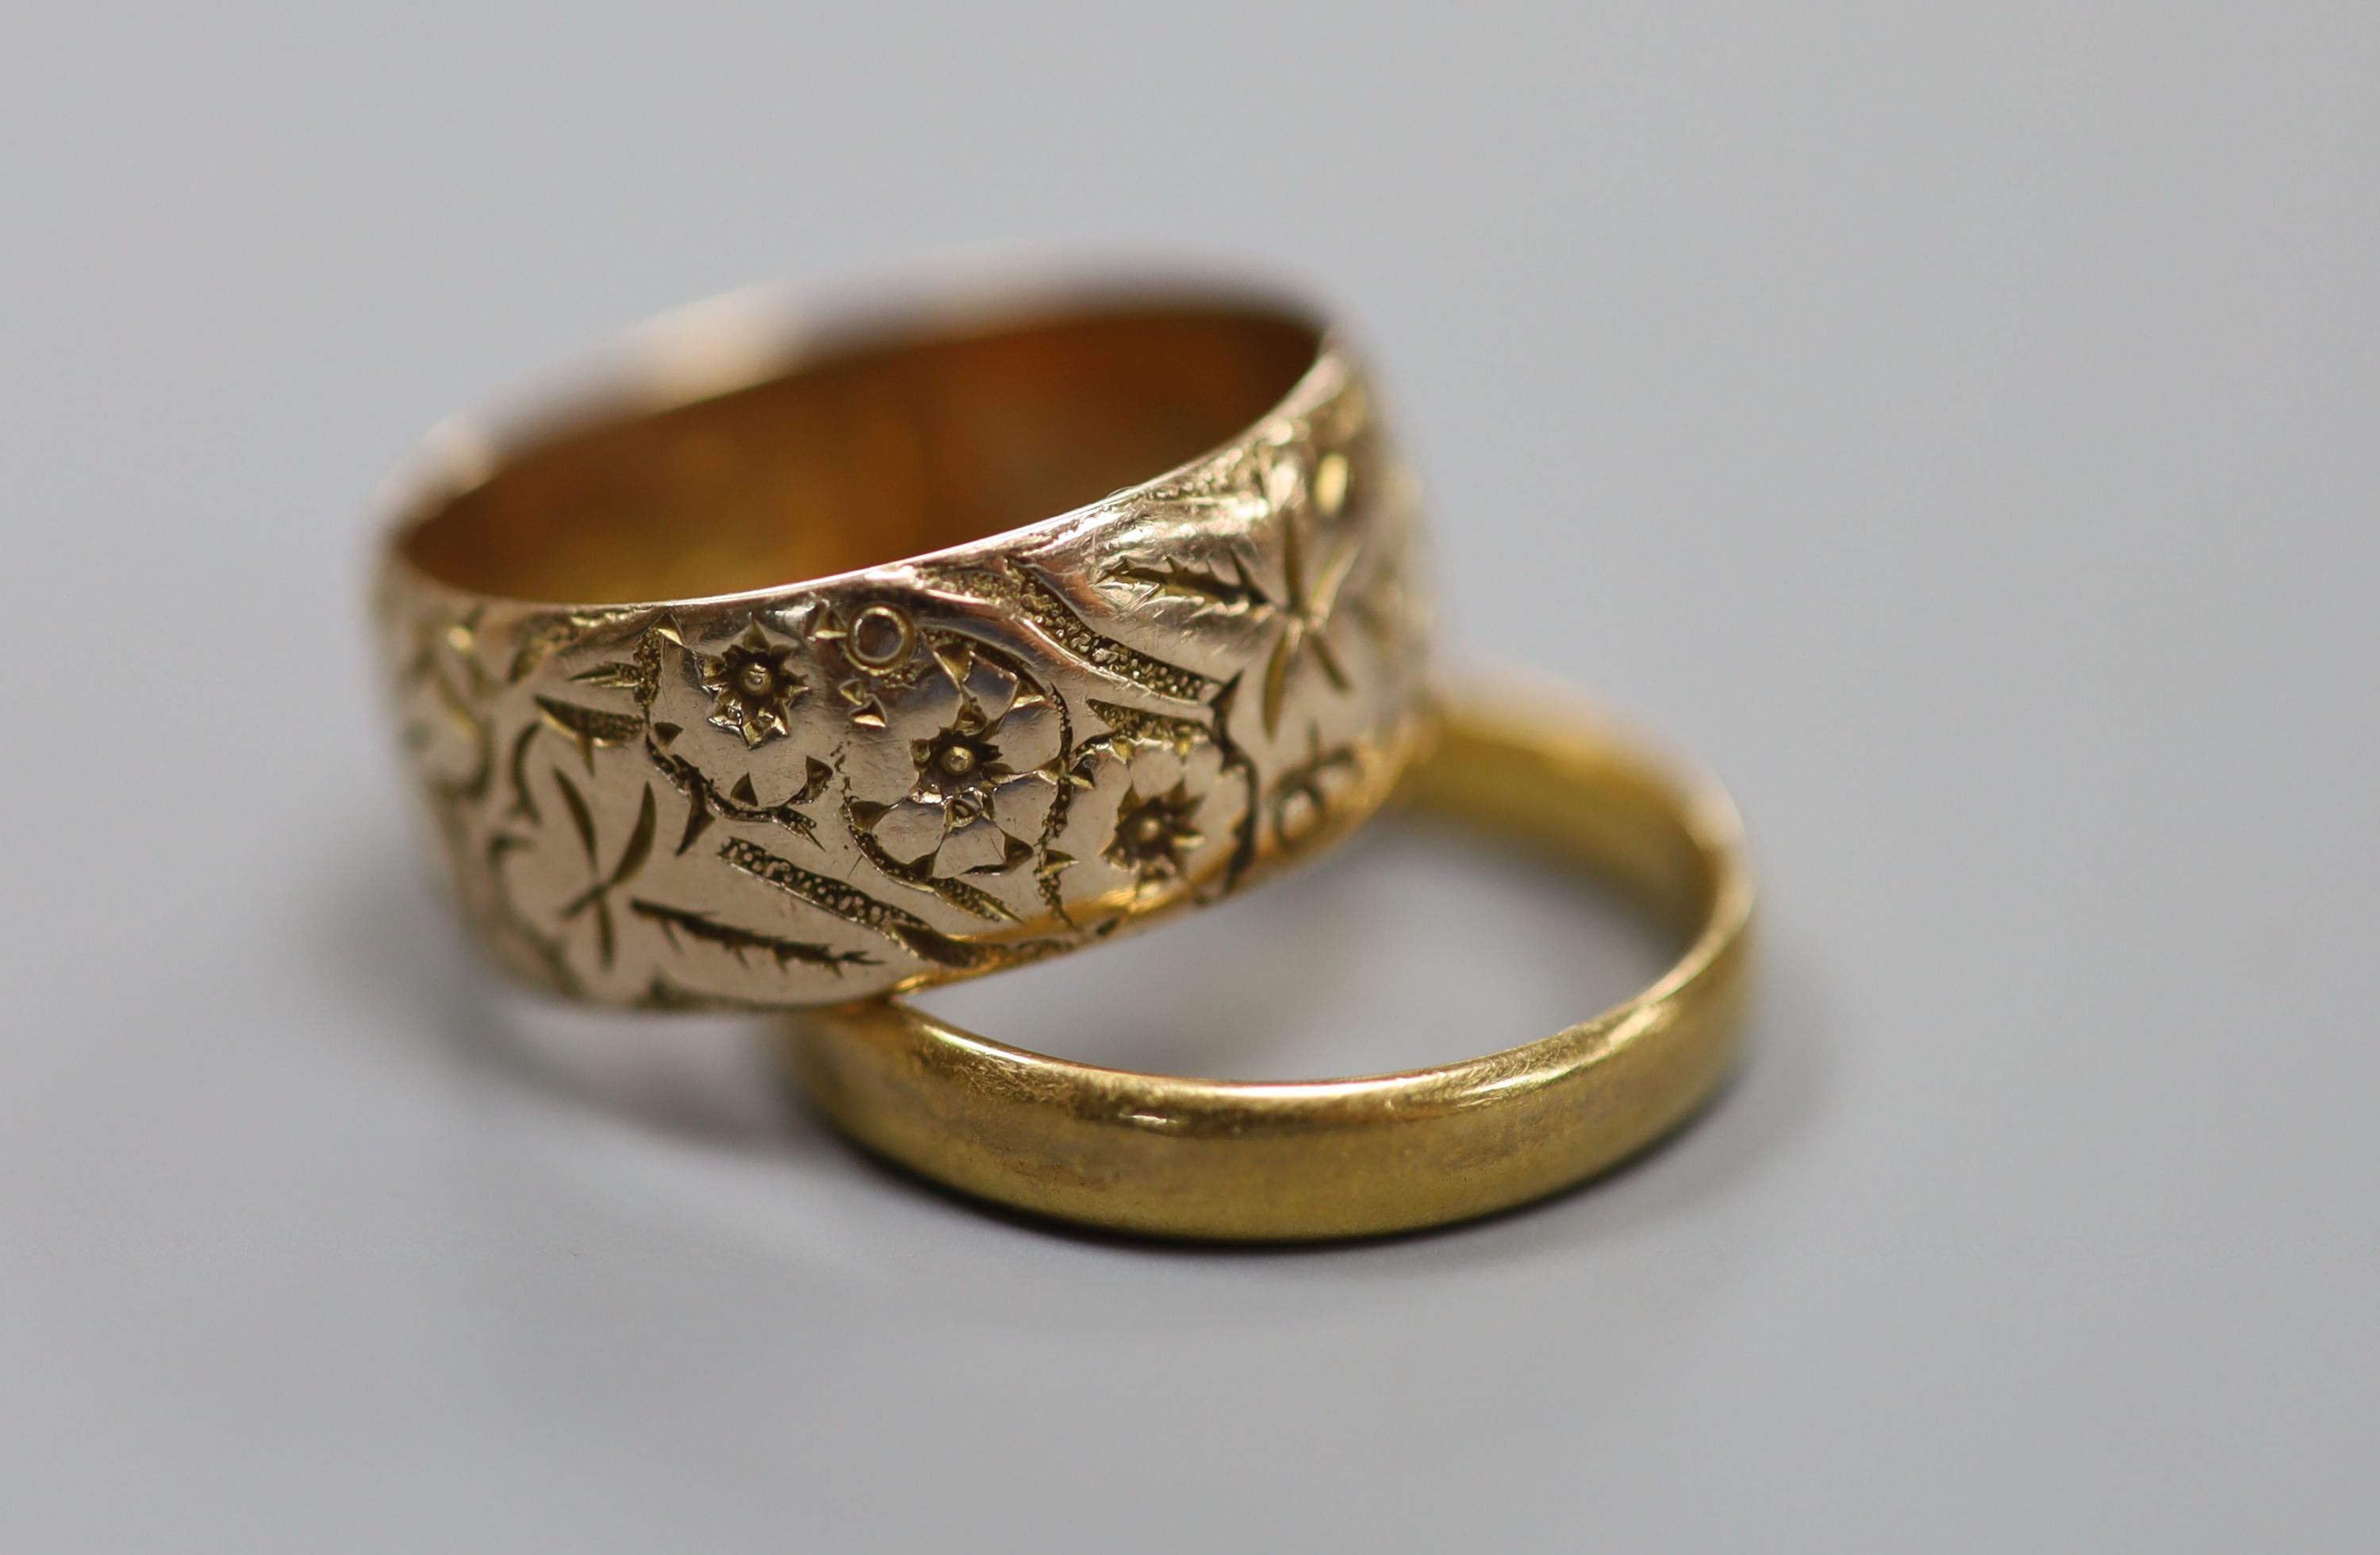 A 9ct gold wedding band, 4.5 grams and a 22ct gold wedding ring, 3.3 grams.